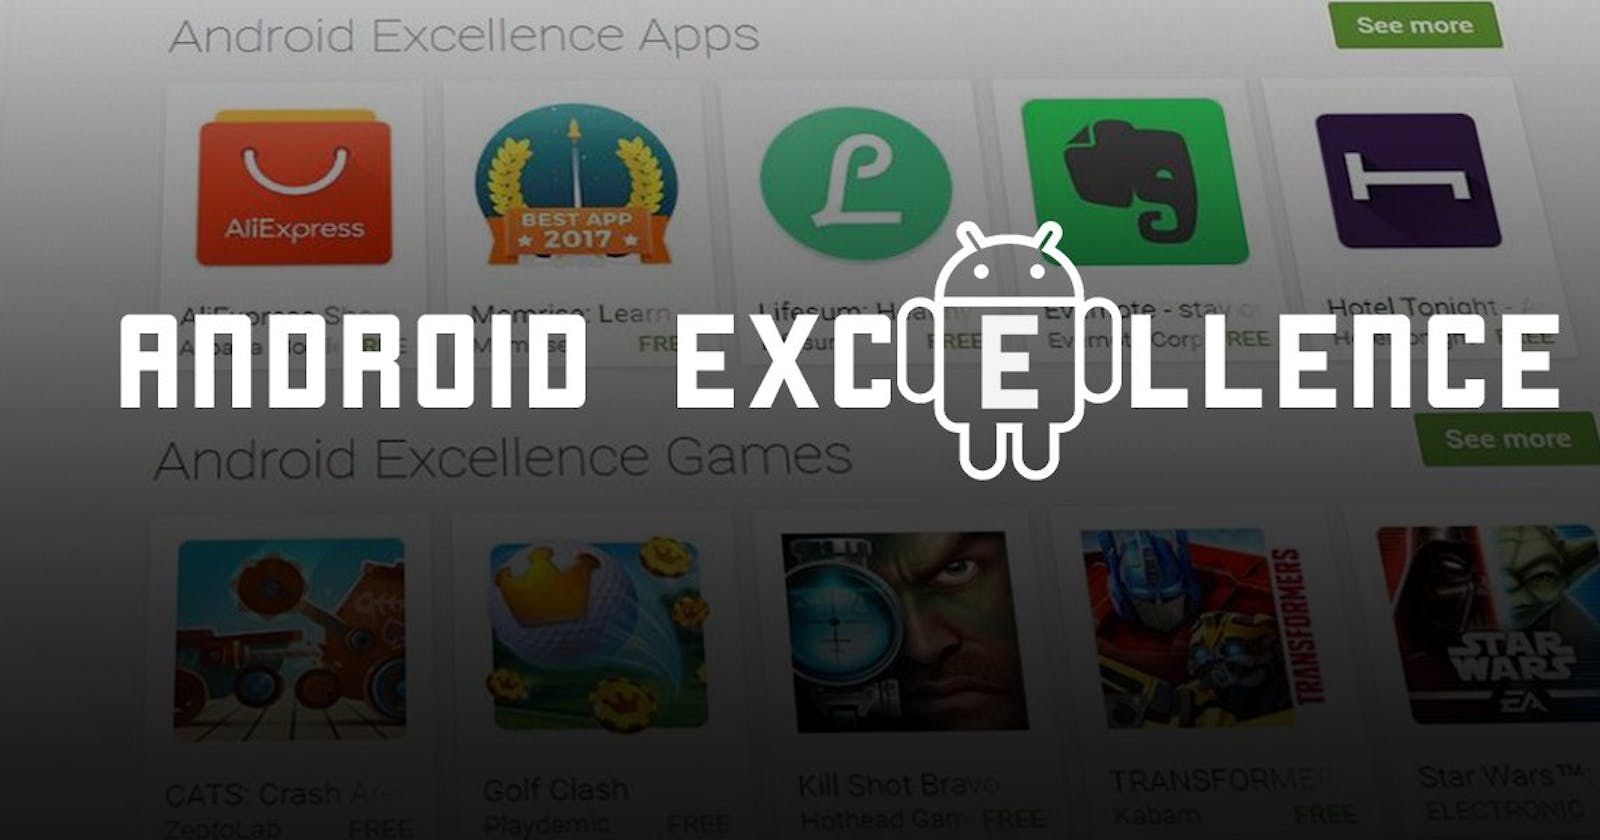 Google's Latest Announcement - The Android Excellence Program on Google Play